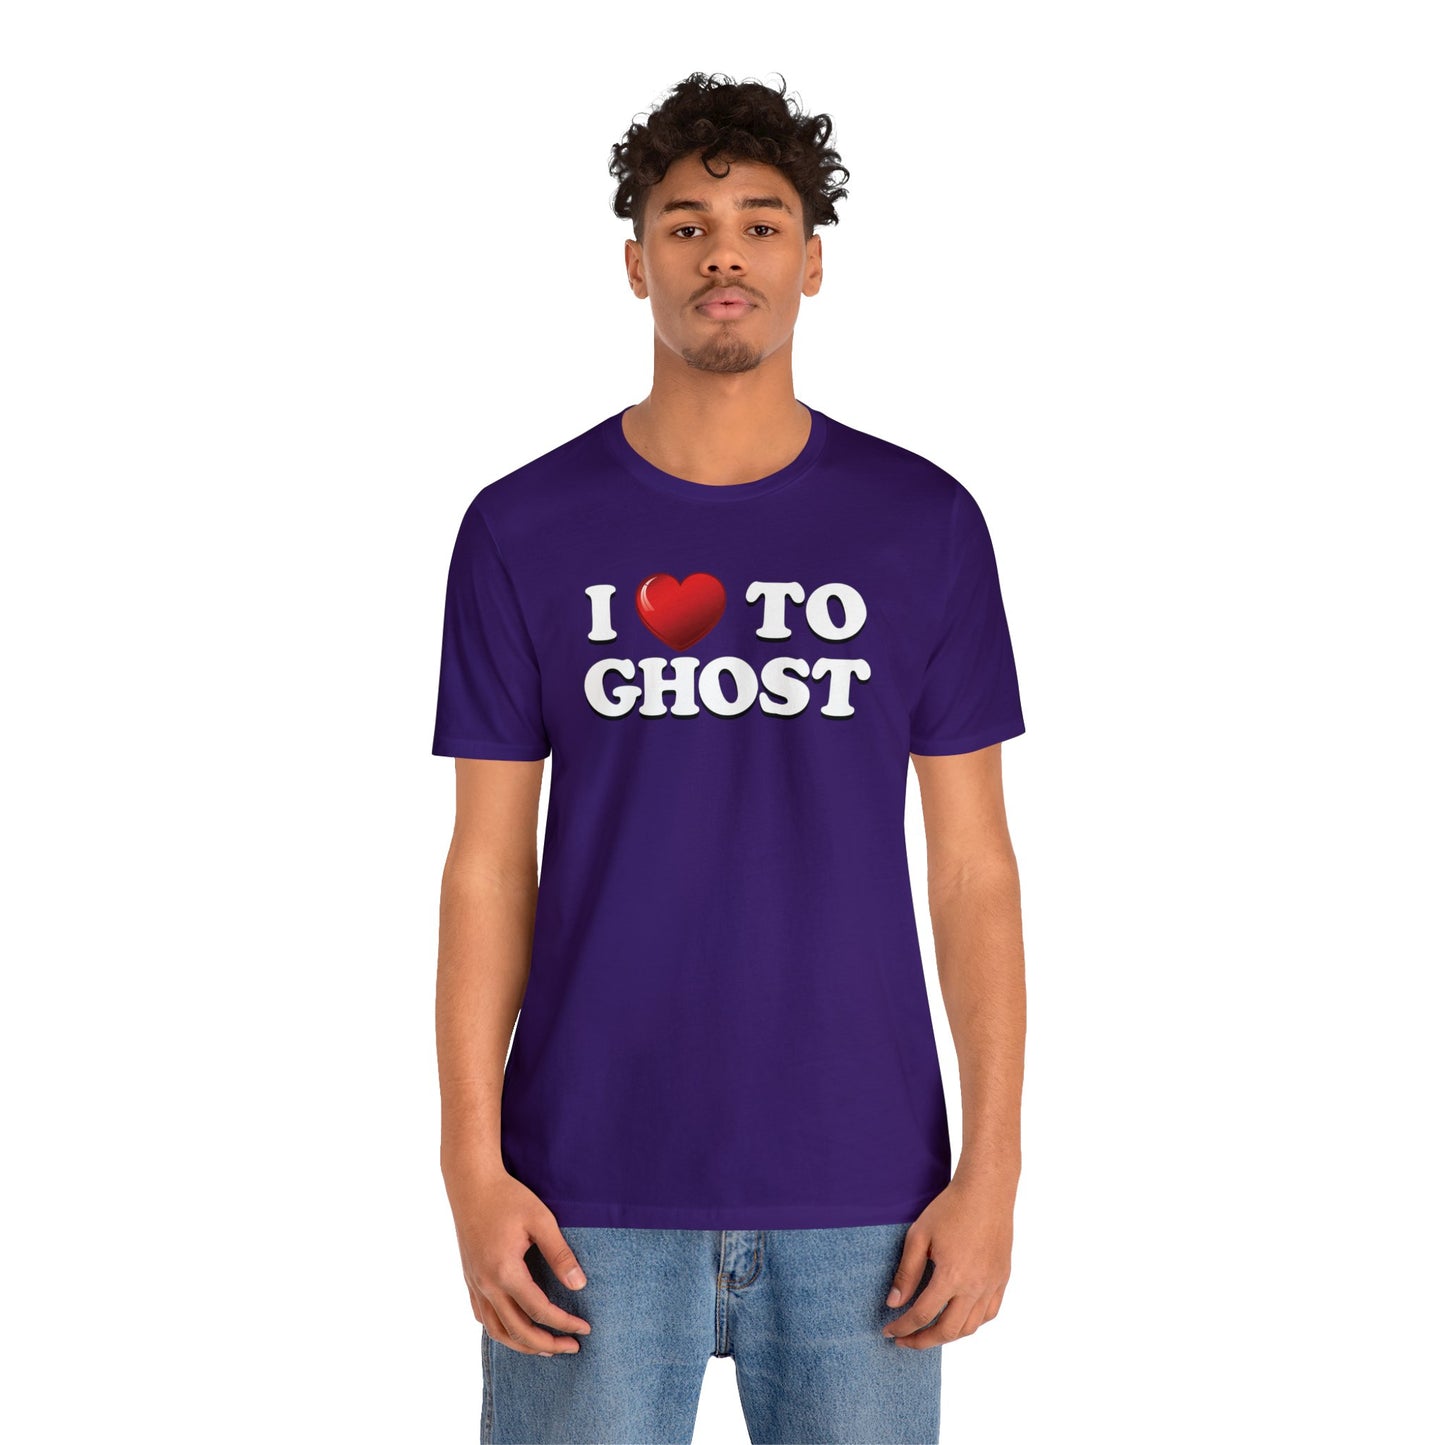 I ❤️ To Ghost - Unisex Jersey Short Sleeve Tee